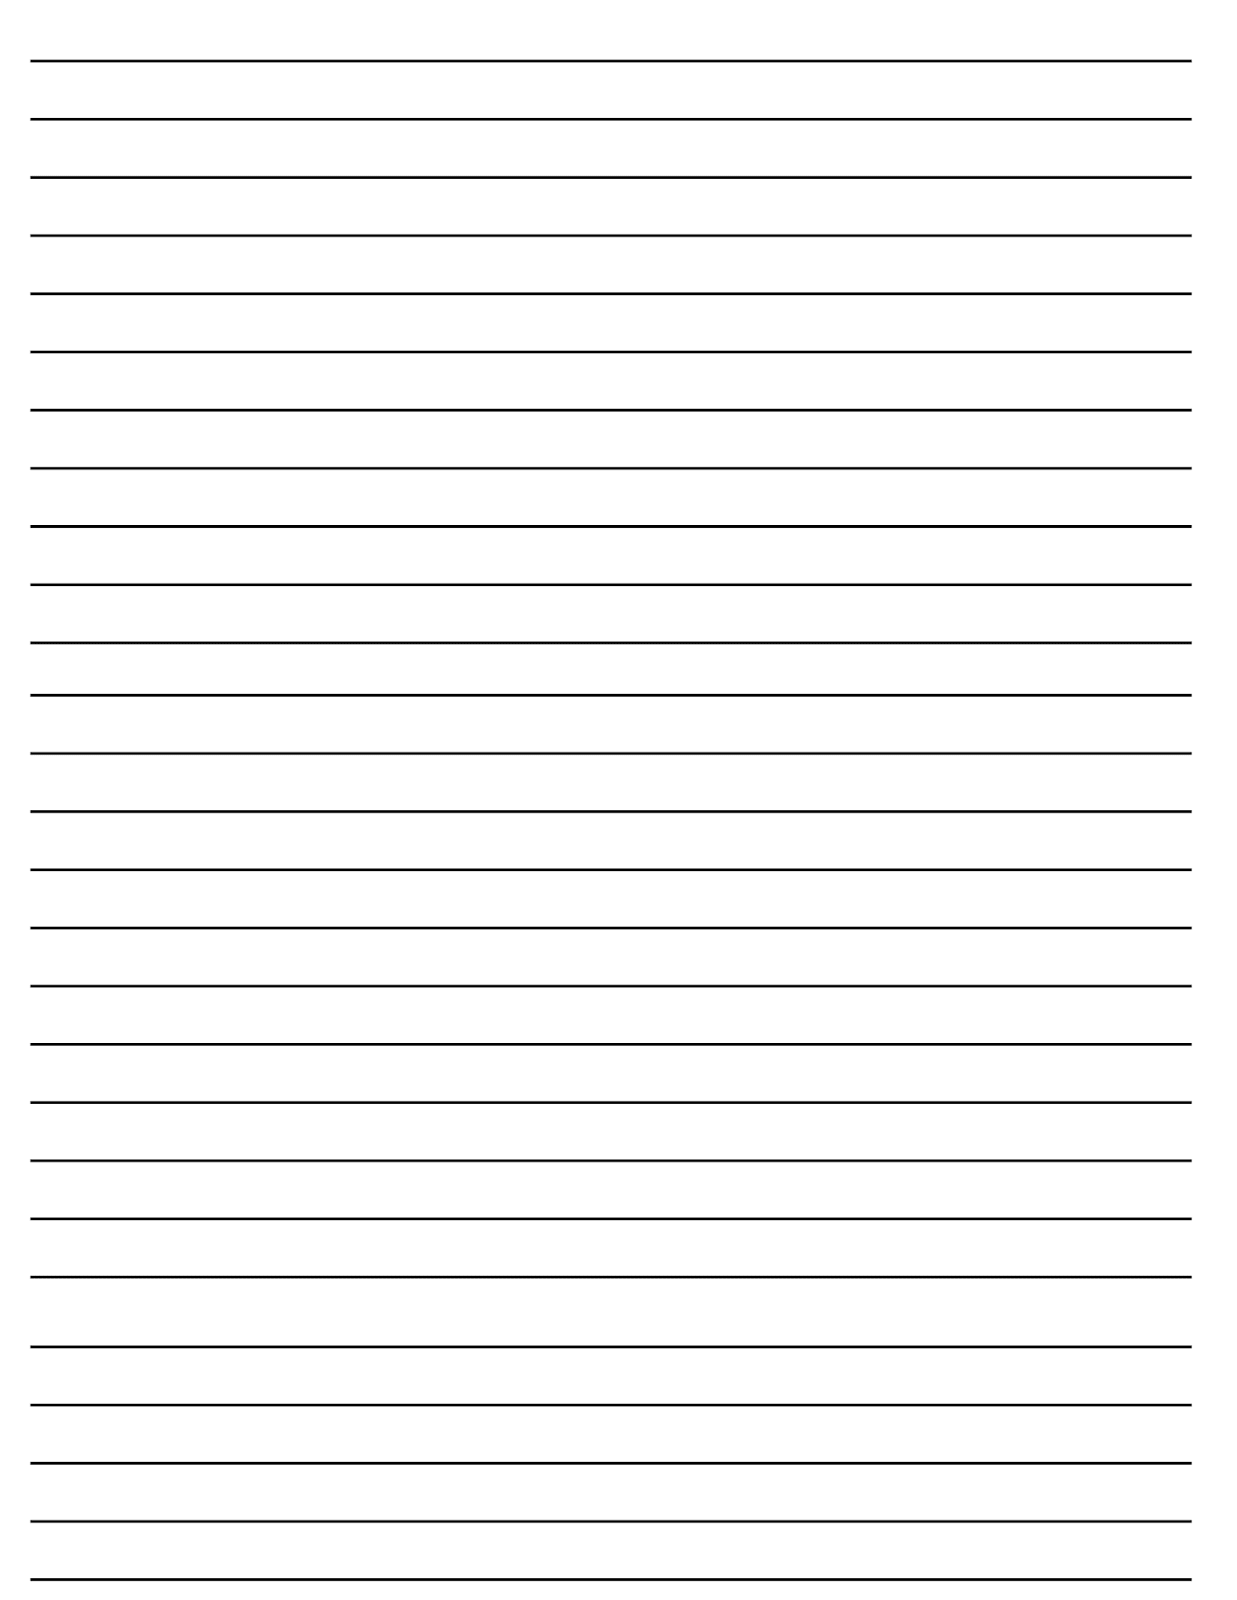 Lined Writing Paper For Kindergarten Free lined paper template 12